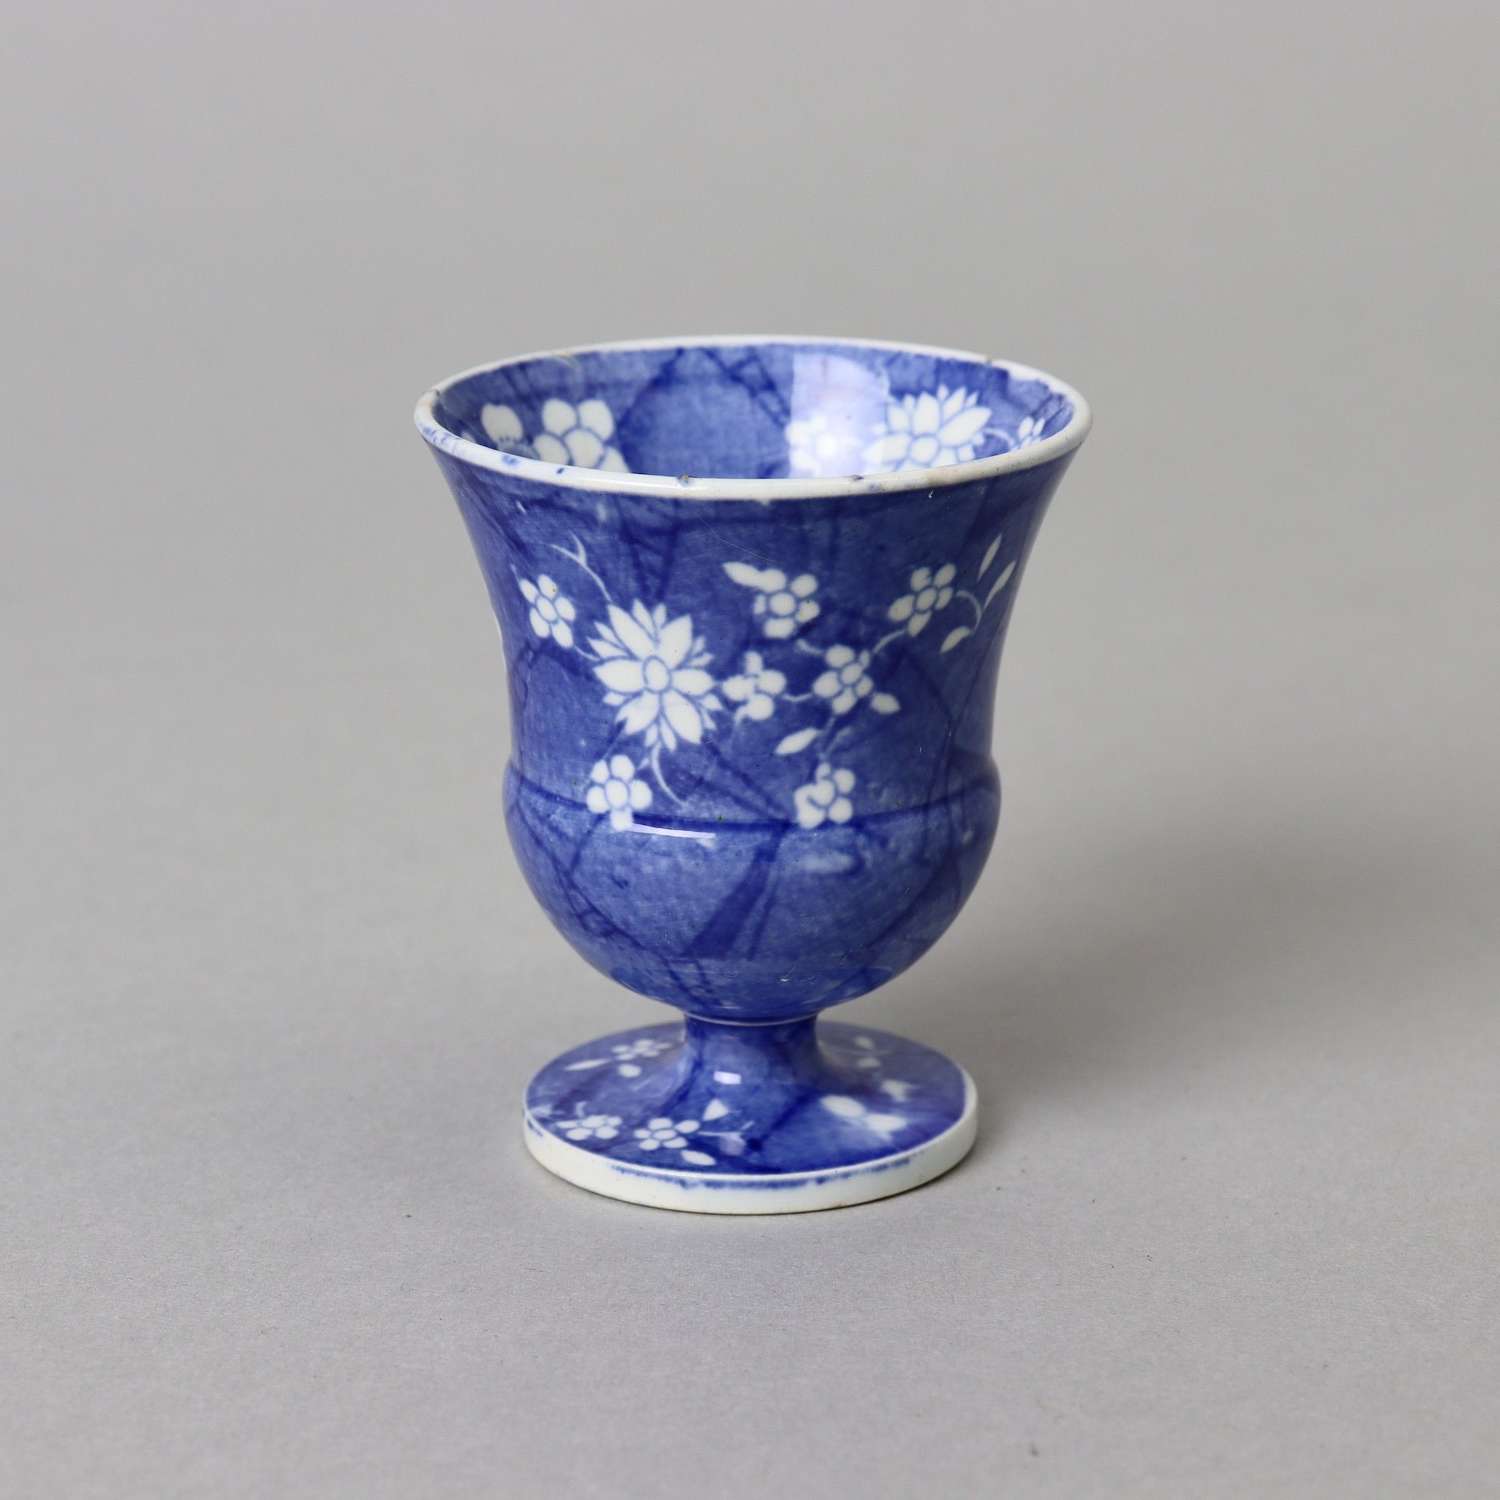 Spode, Blue and White Egg Cup